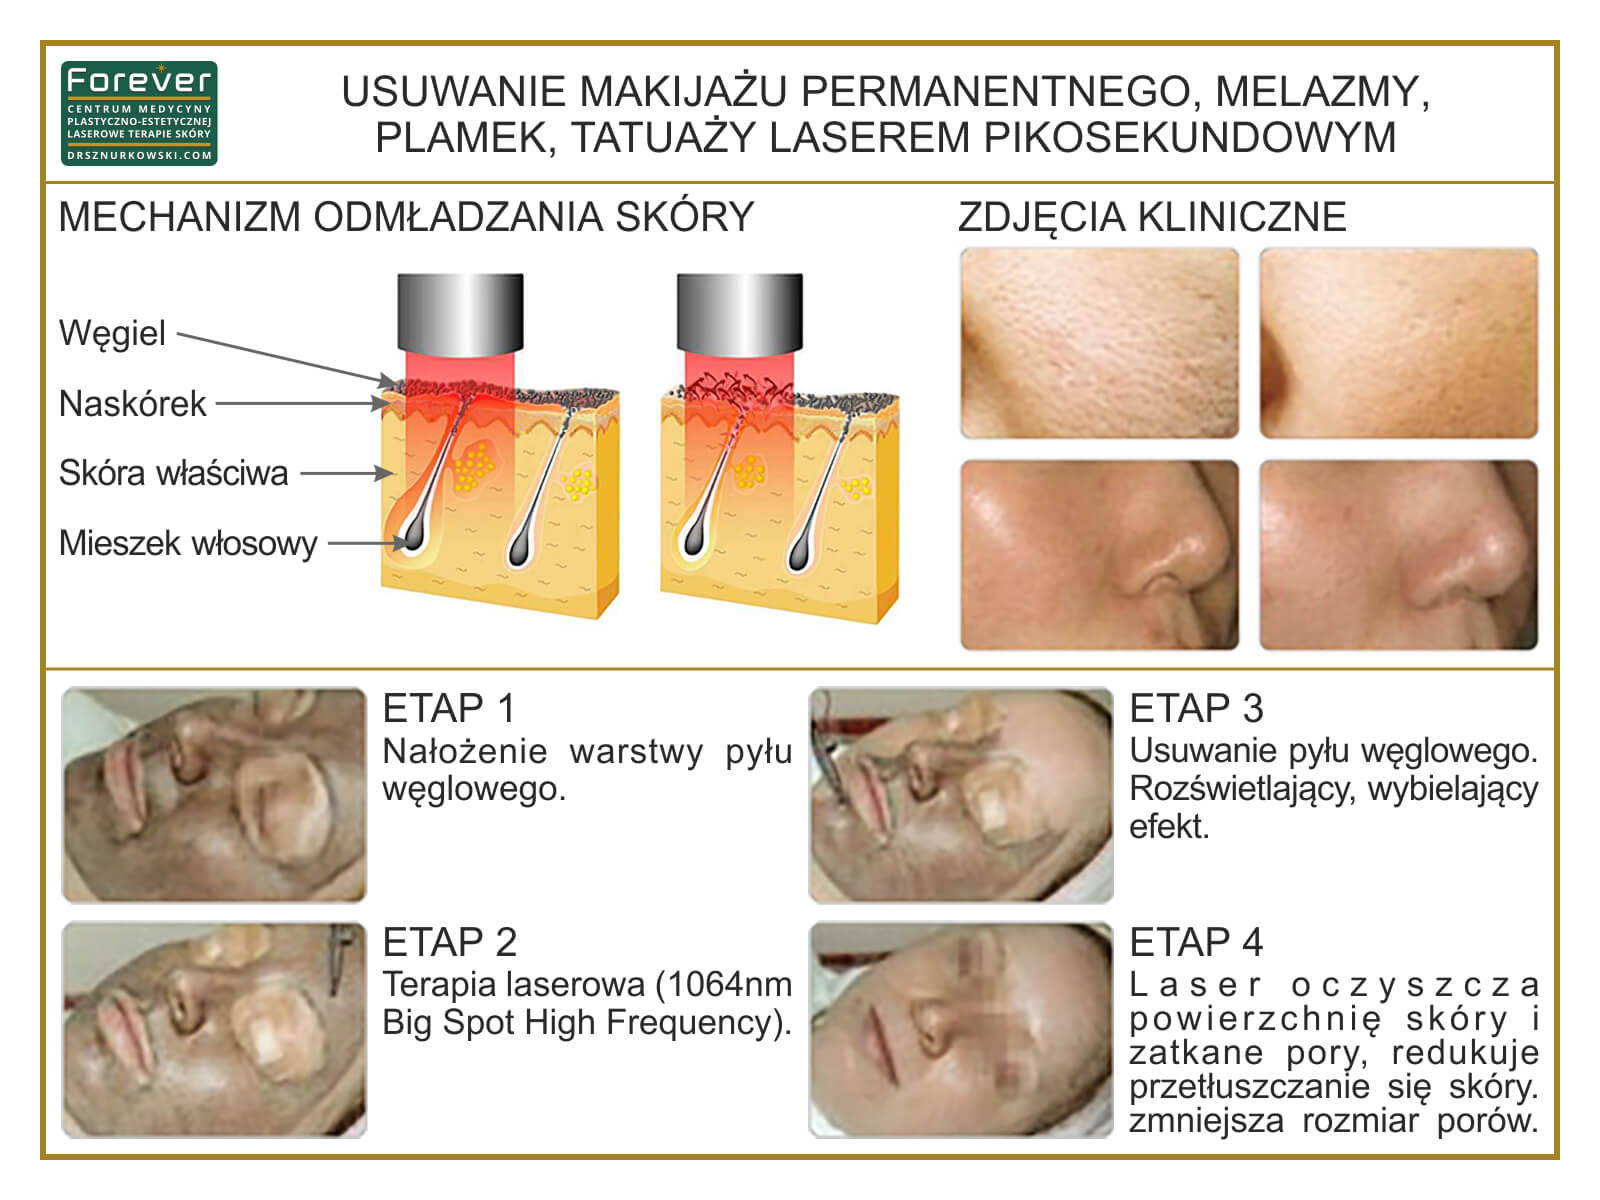 Permanent Make-up And Melasma Removal, Spots, Picosecond... (80x60) PL.jpg